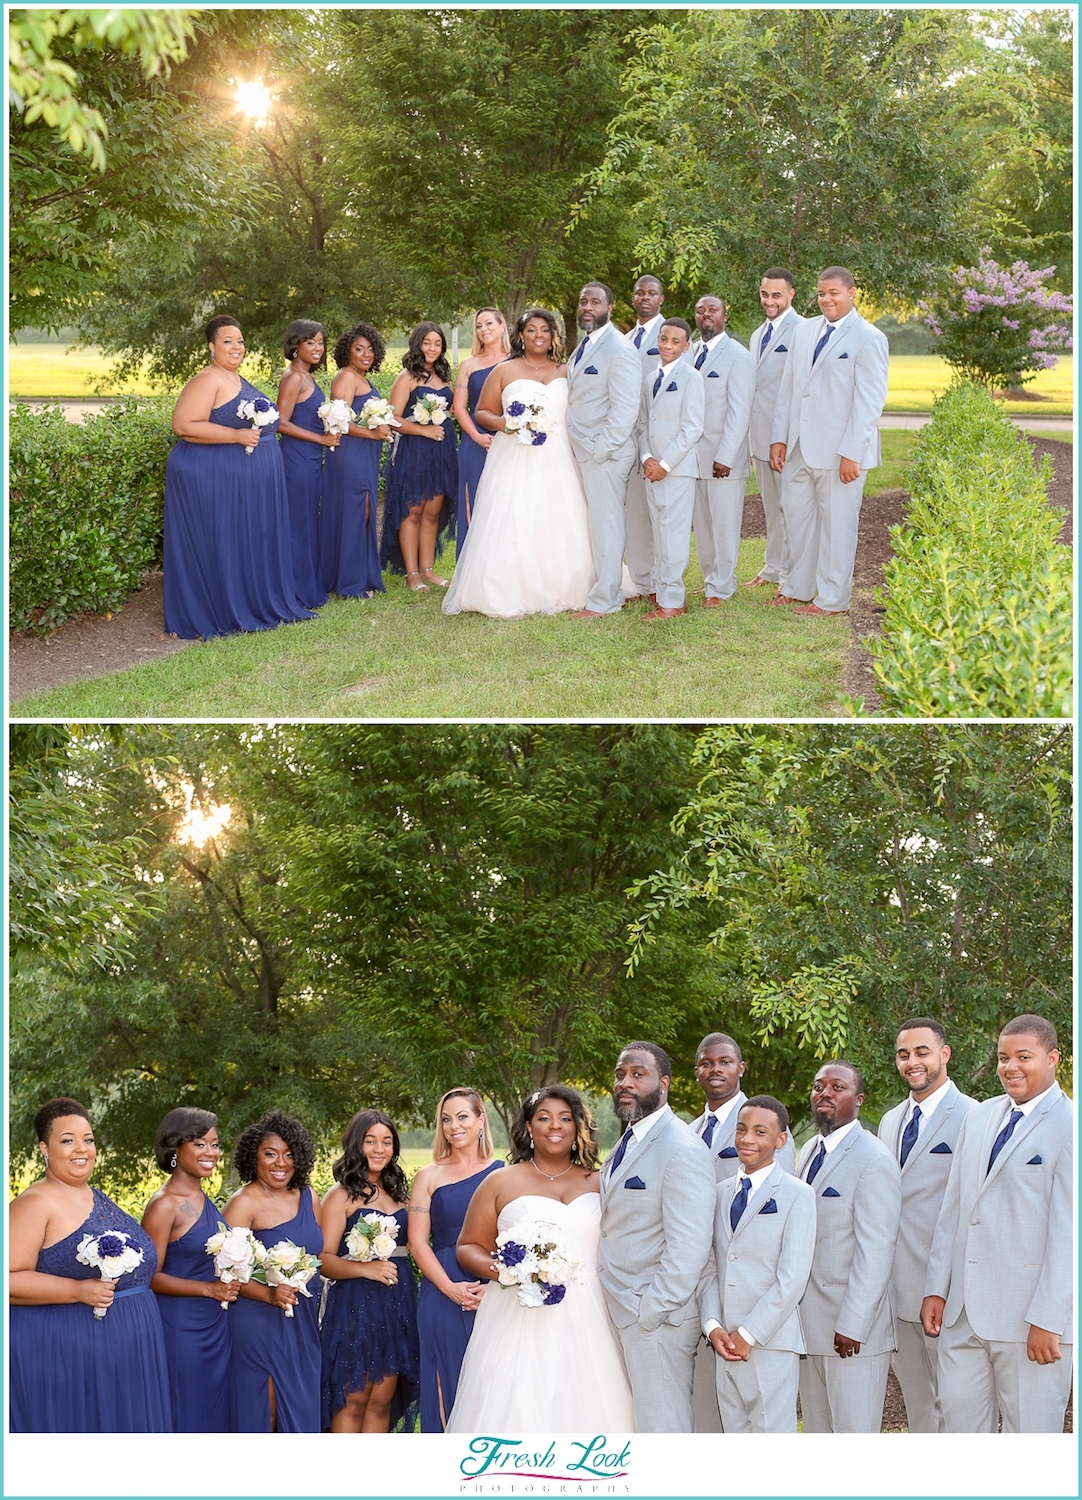 bridal party wearing navy and gray